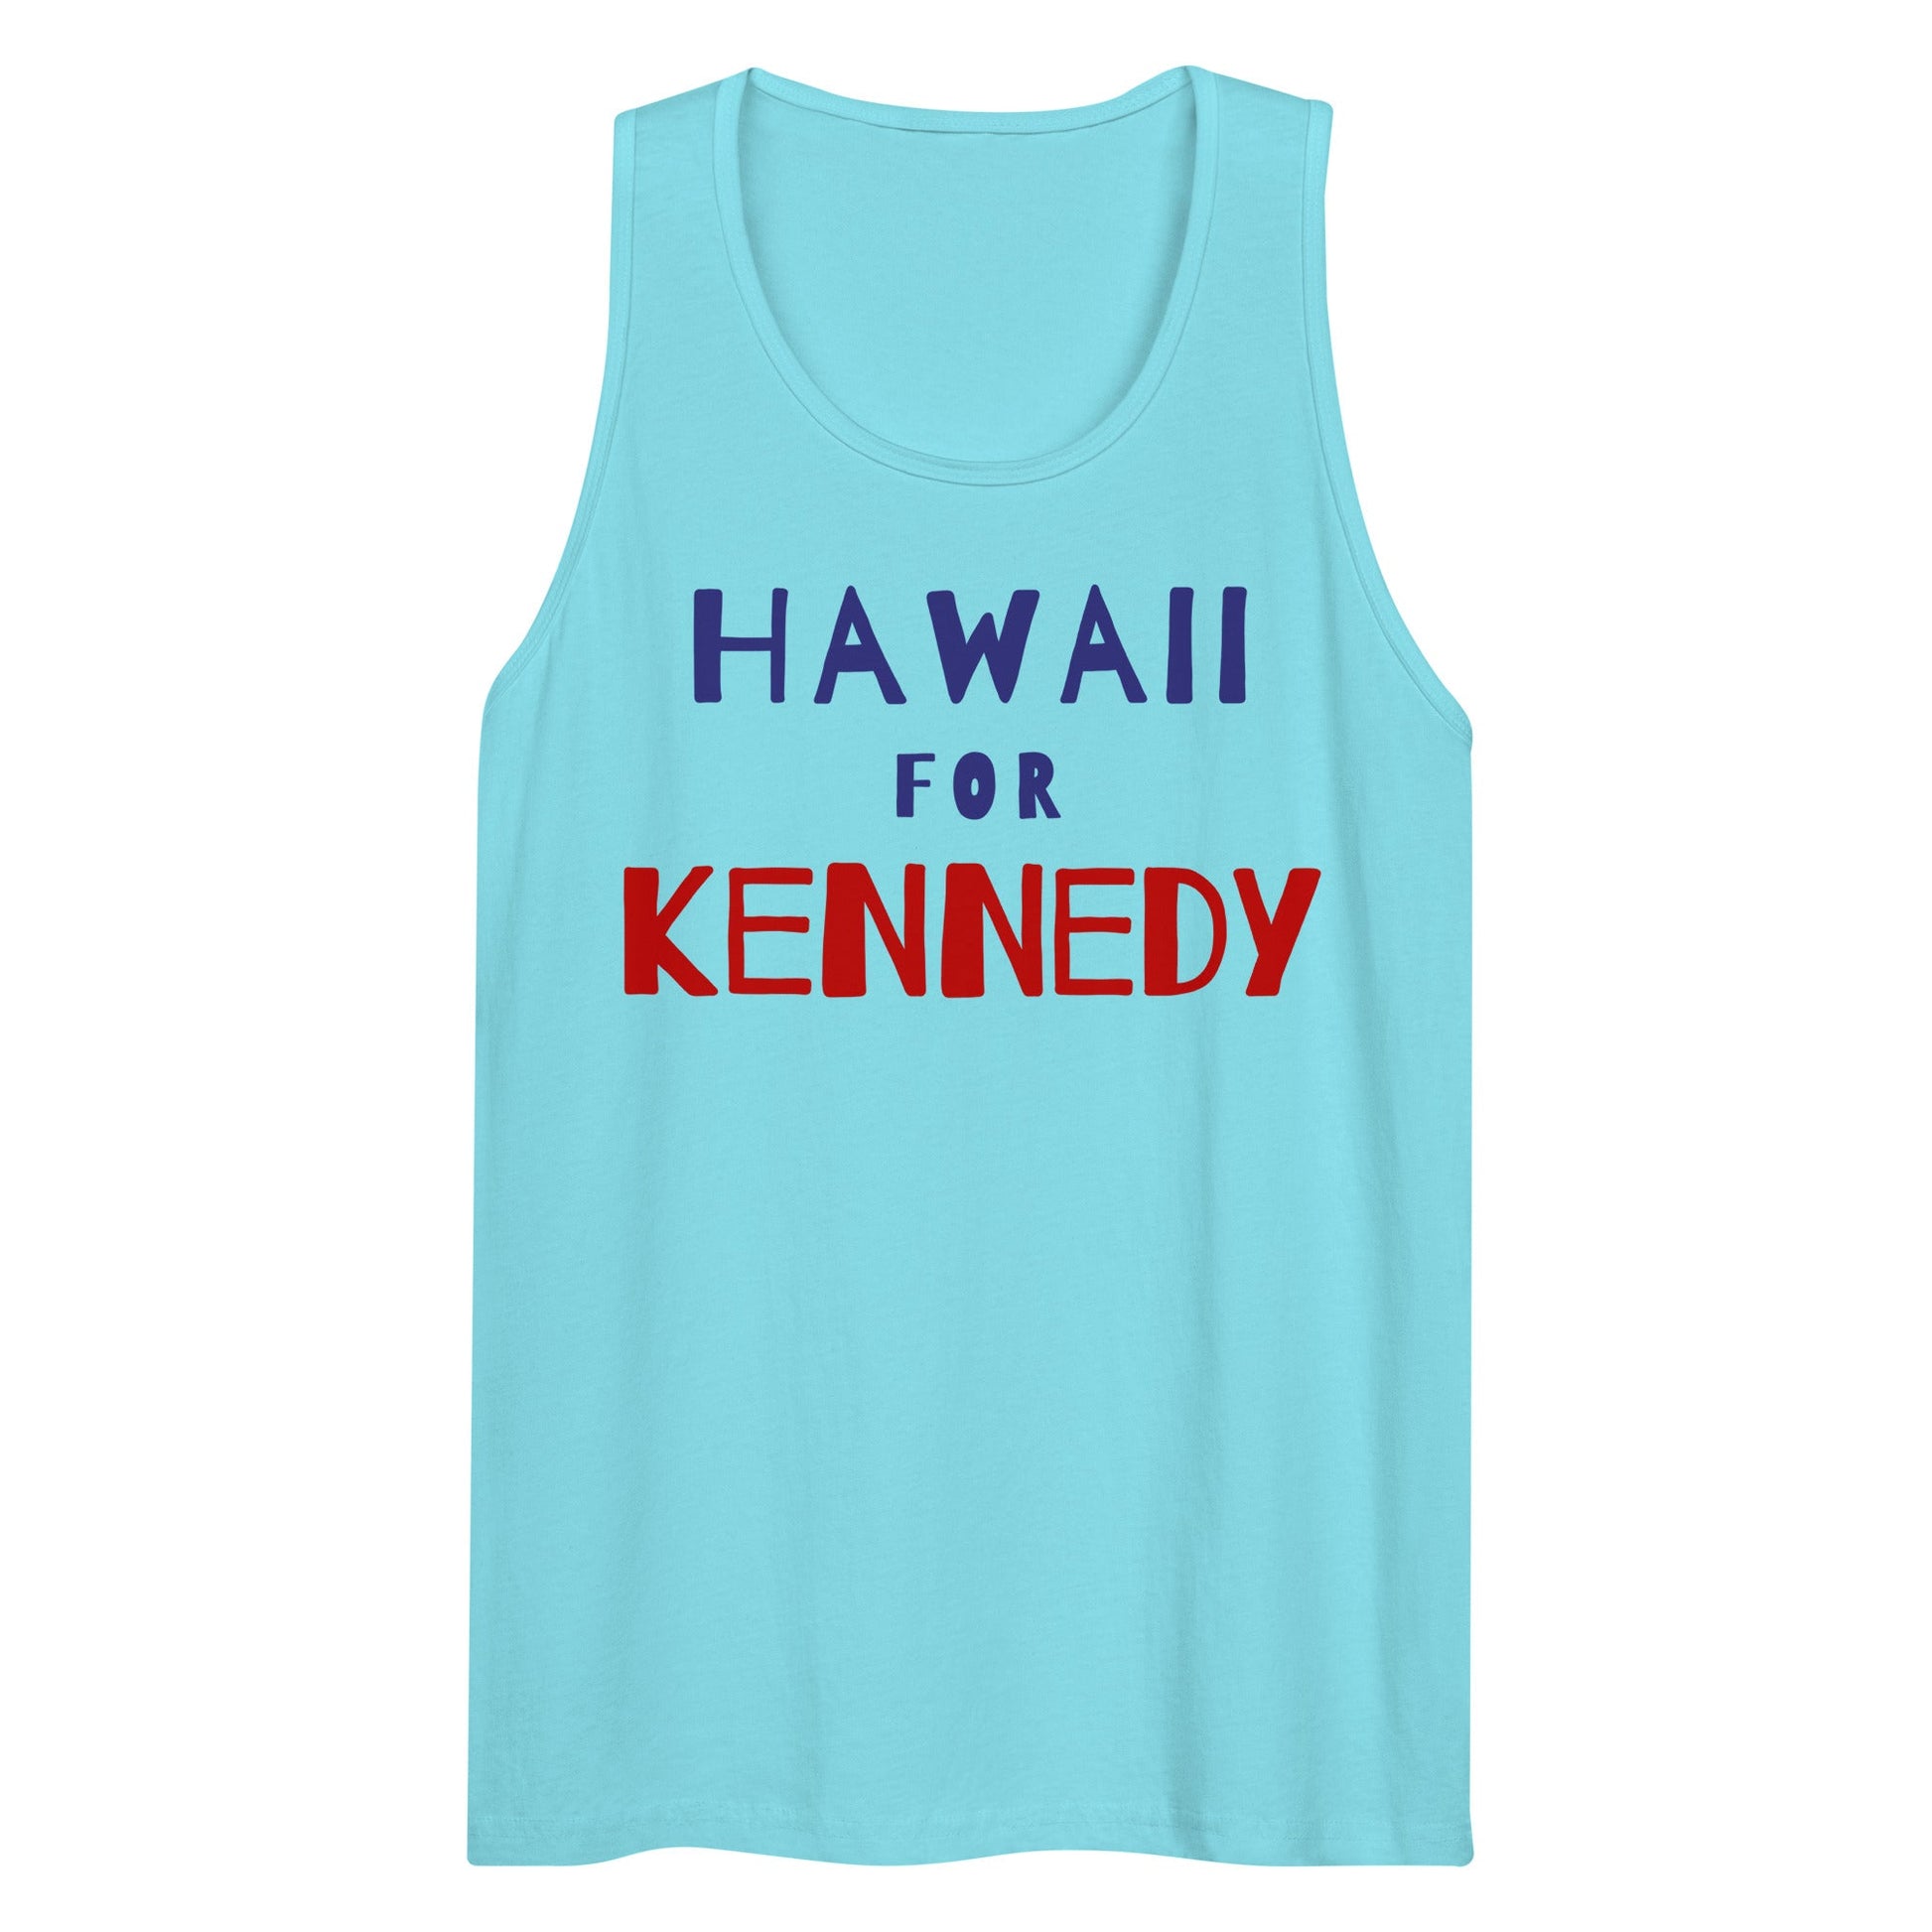 Hawaii for Kennedy Men’s Tank Top - TEAM KENNEDY. All rights reserved